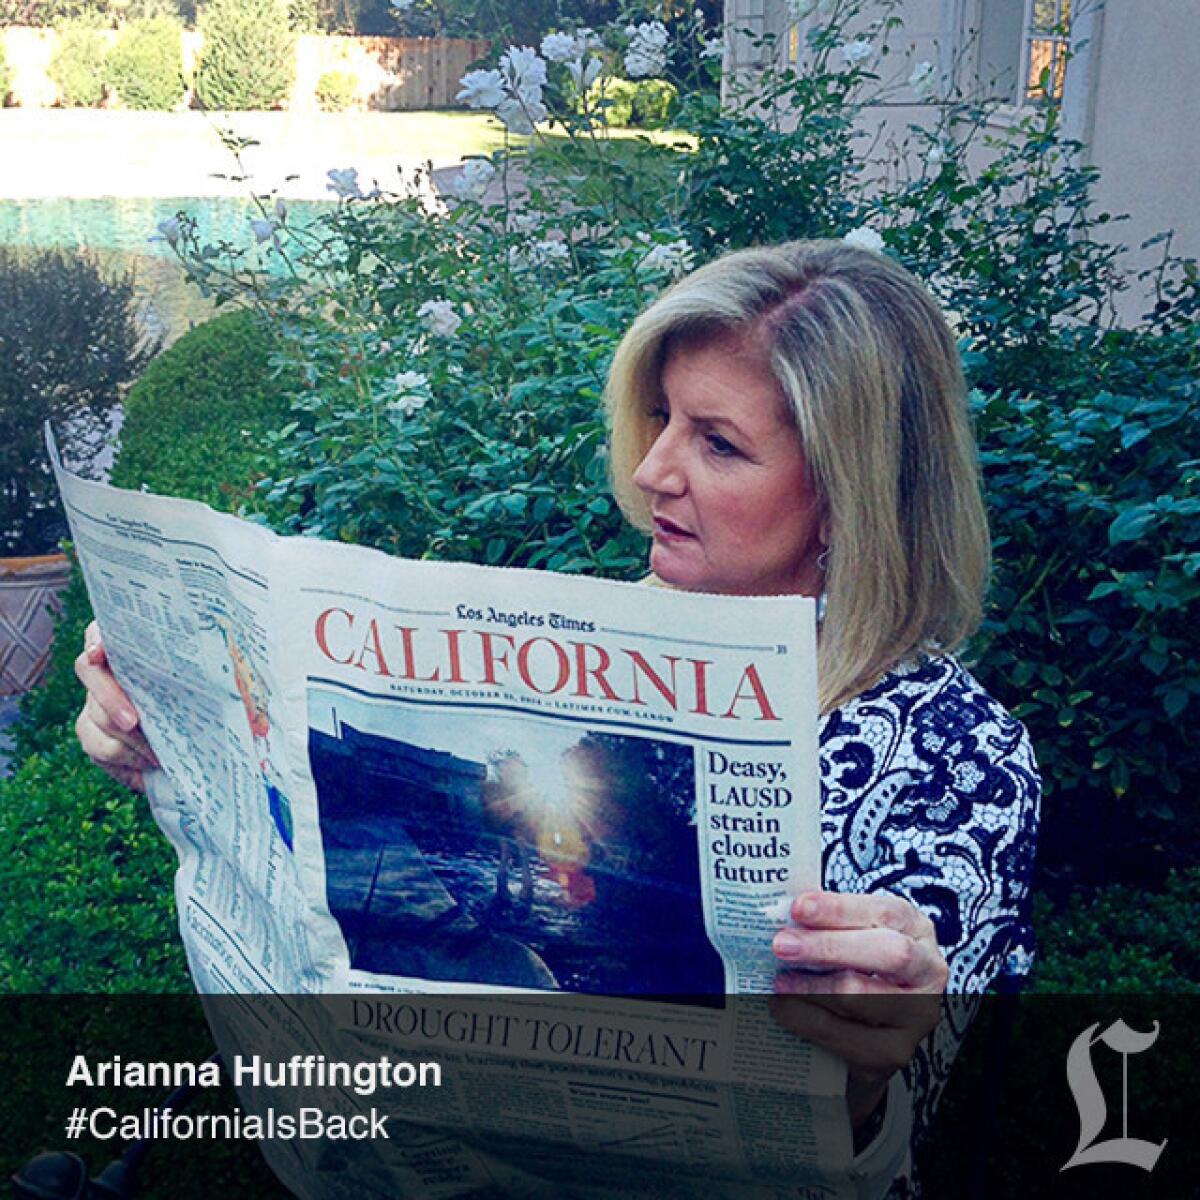 Arianna Huffington, Author, Columnist and Chair, President and Editor-In-Chief of Huffington Post Media Group.